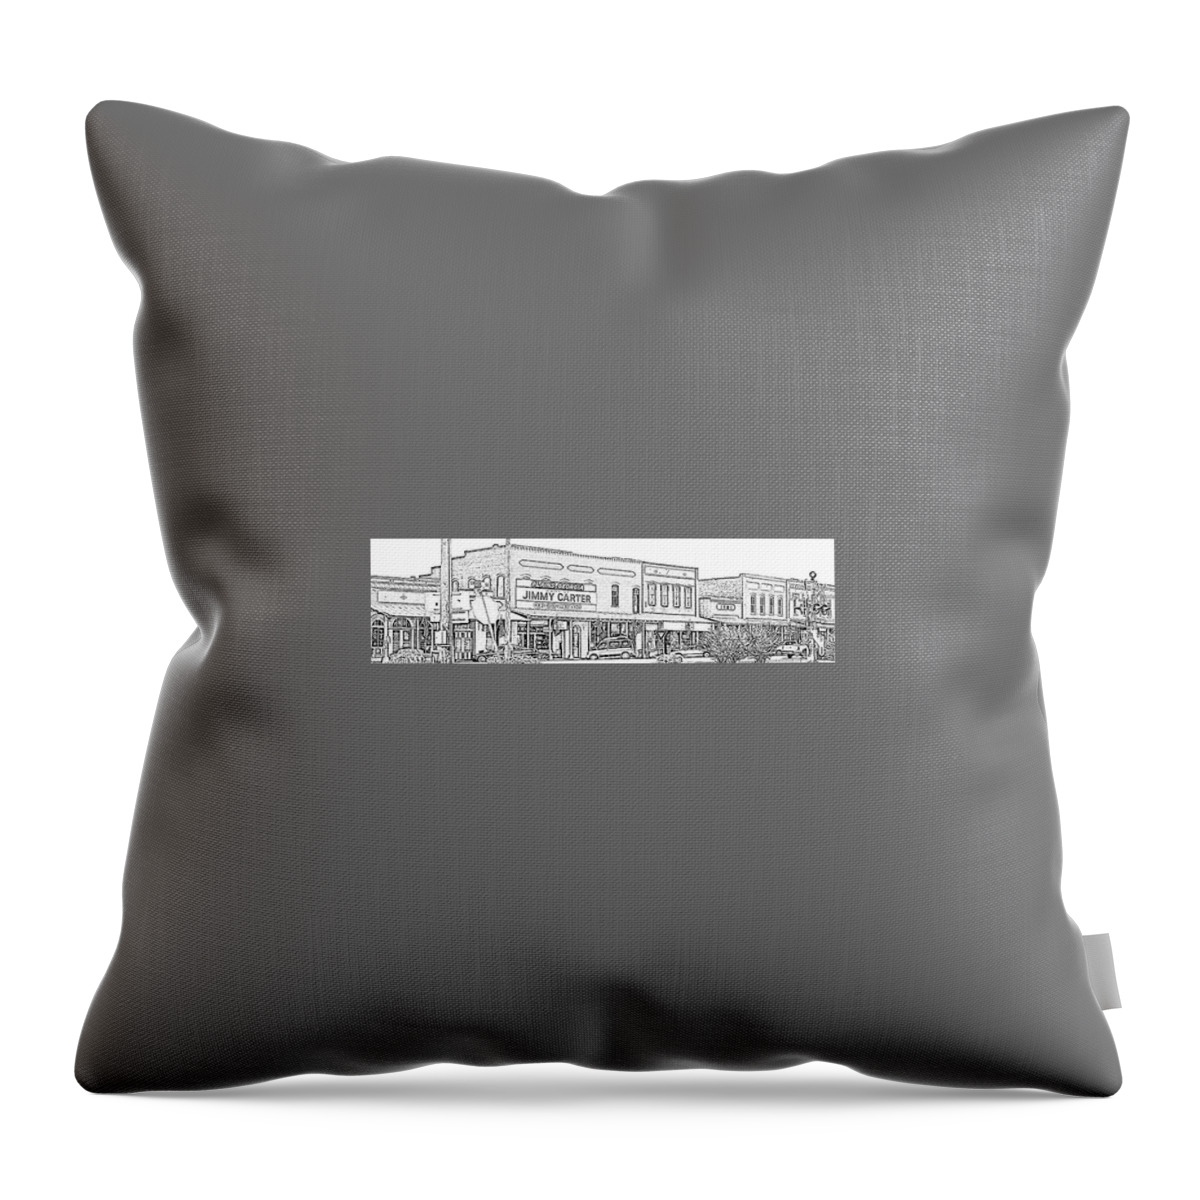 Jimmy Carrter Throw Pillow featuring the photograph Plains Ga downtown by Jerry Battle